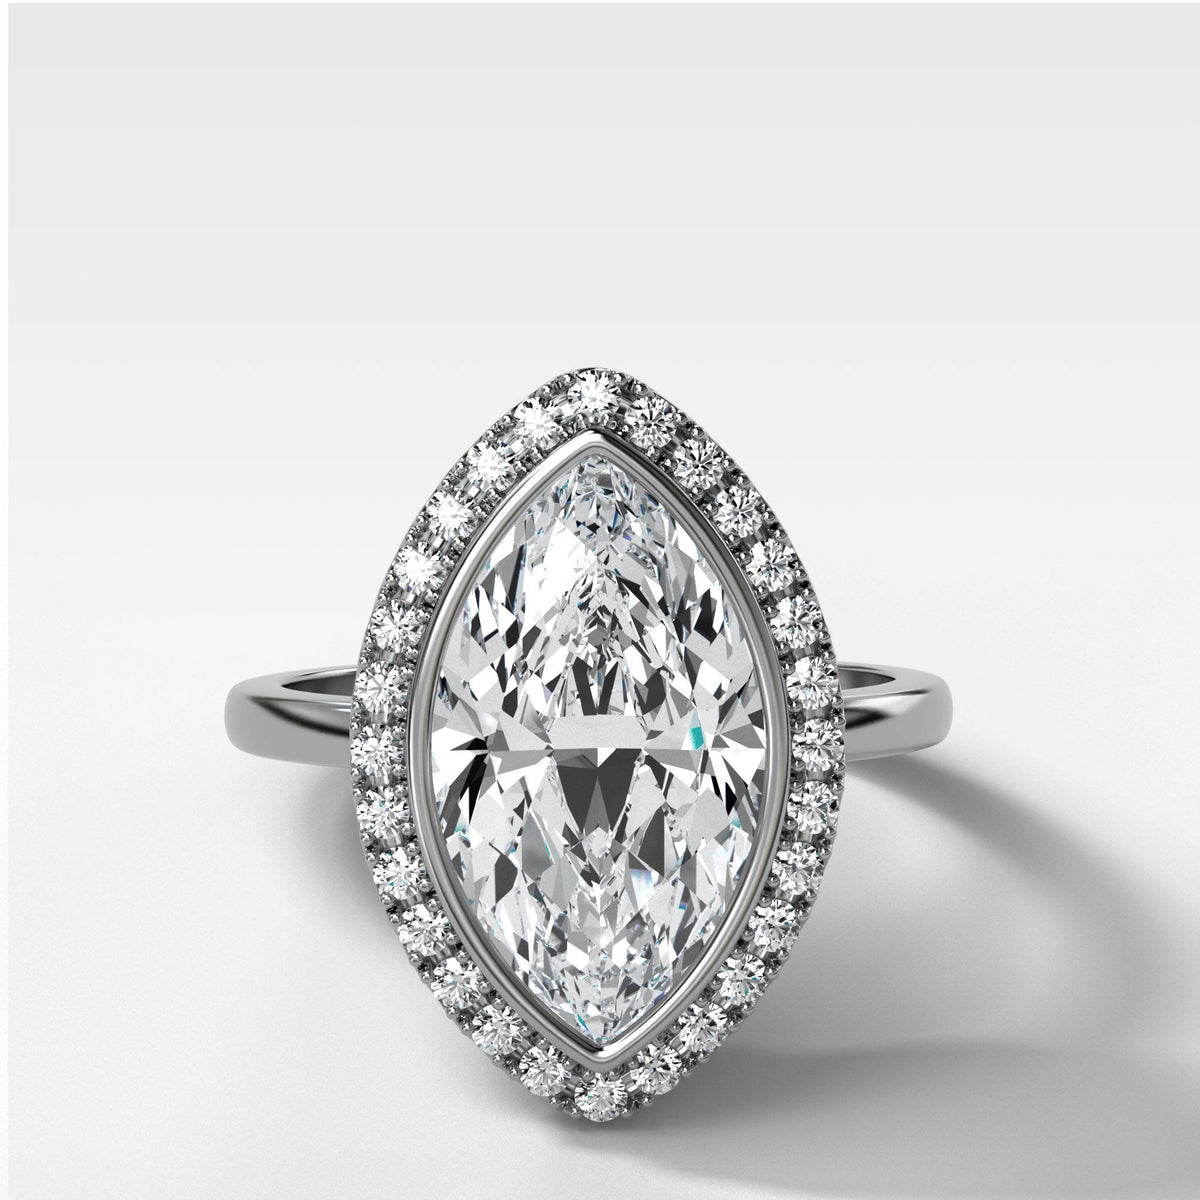 Bezel Set Halo Engagement Ring With Marquise Cut by Good Stone in White Gold